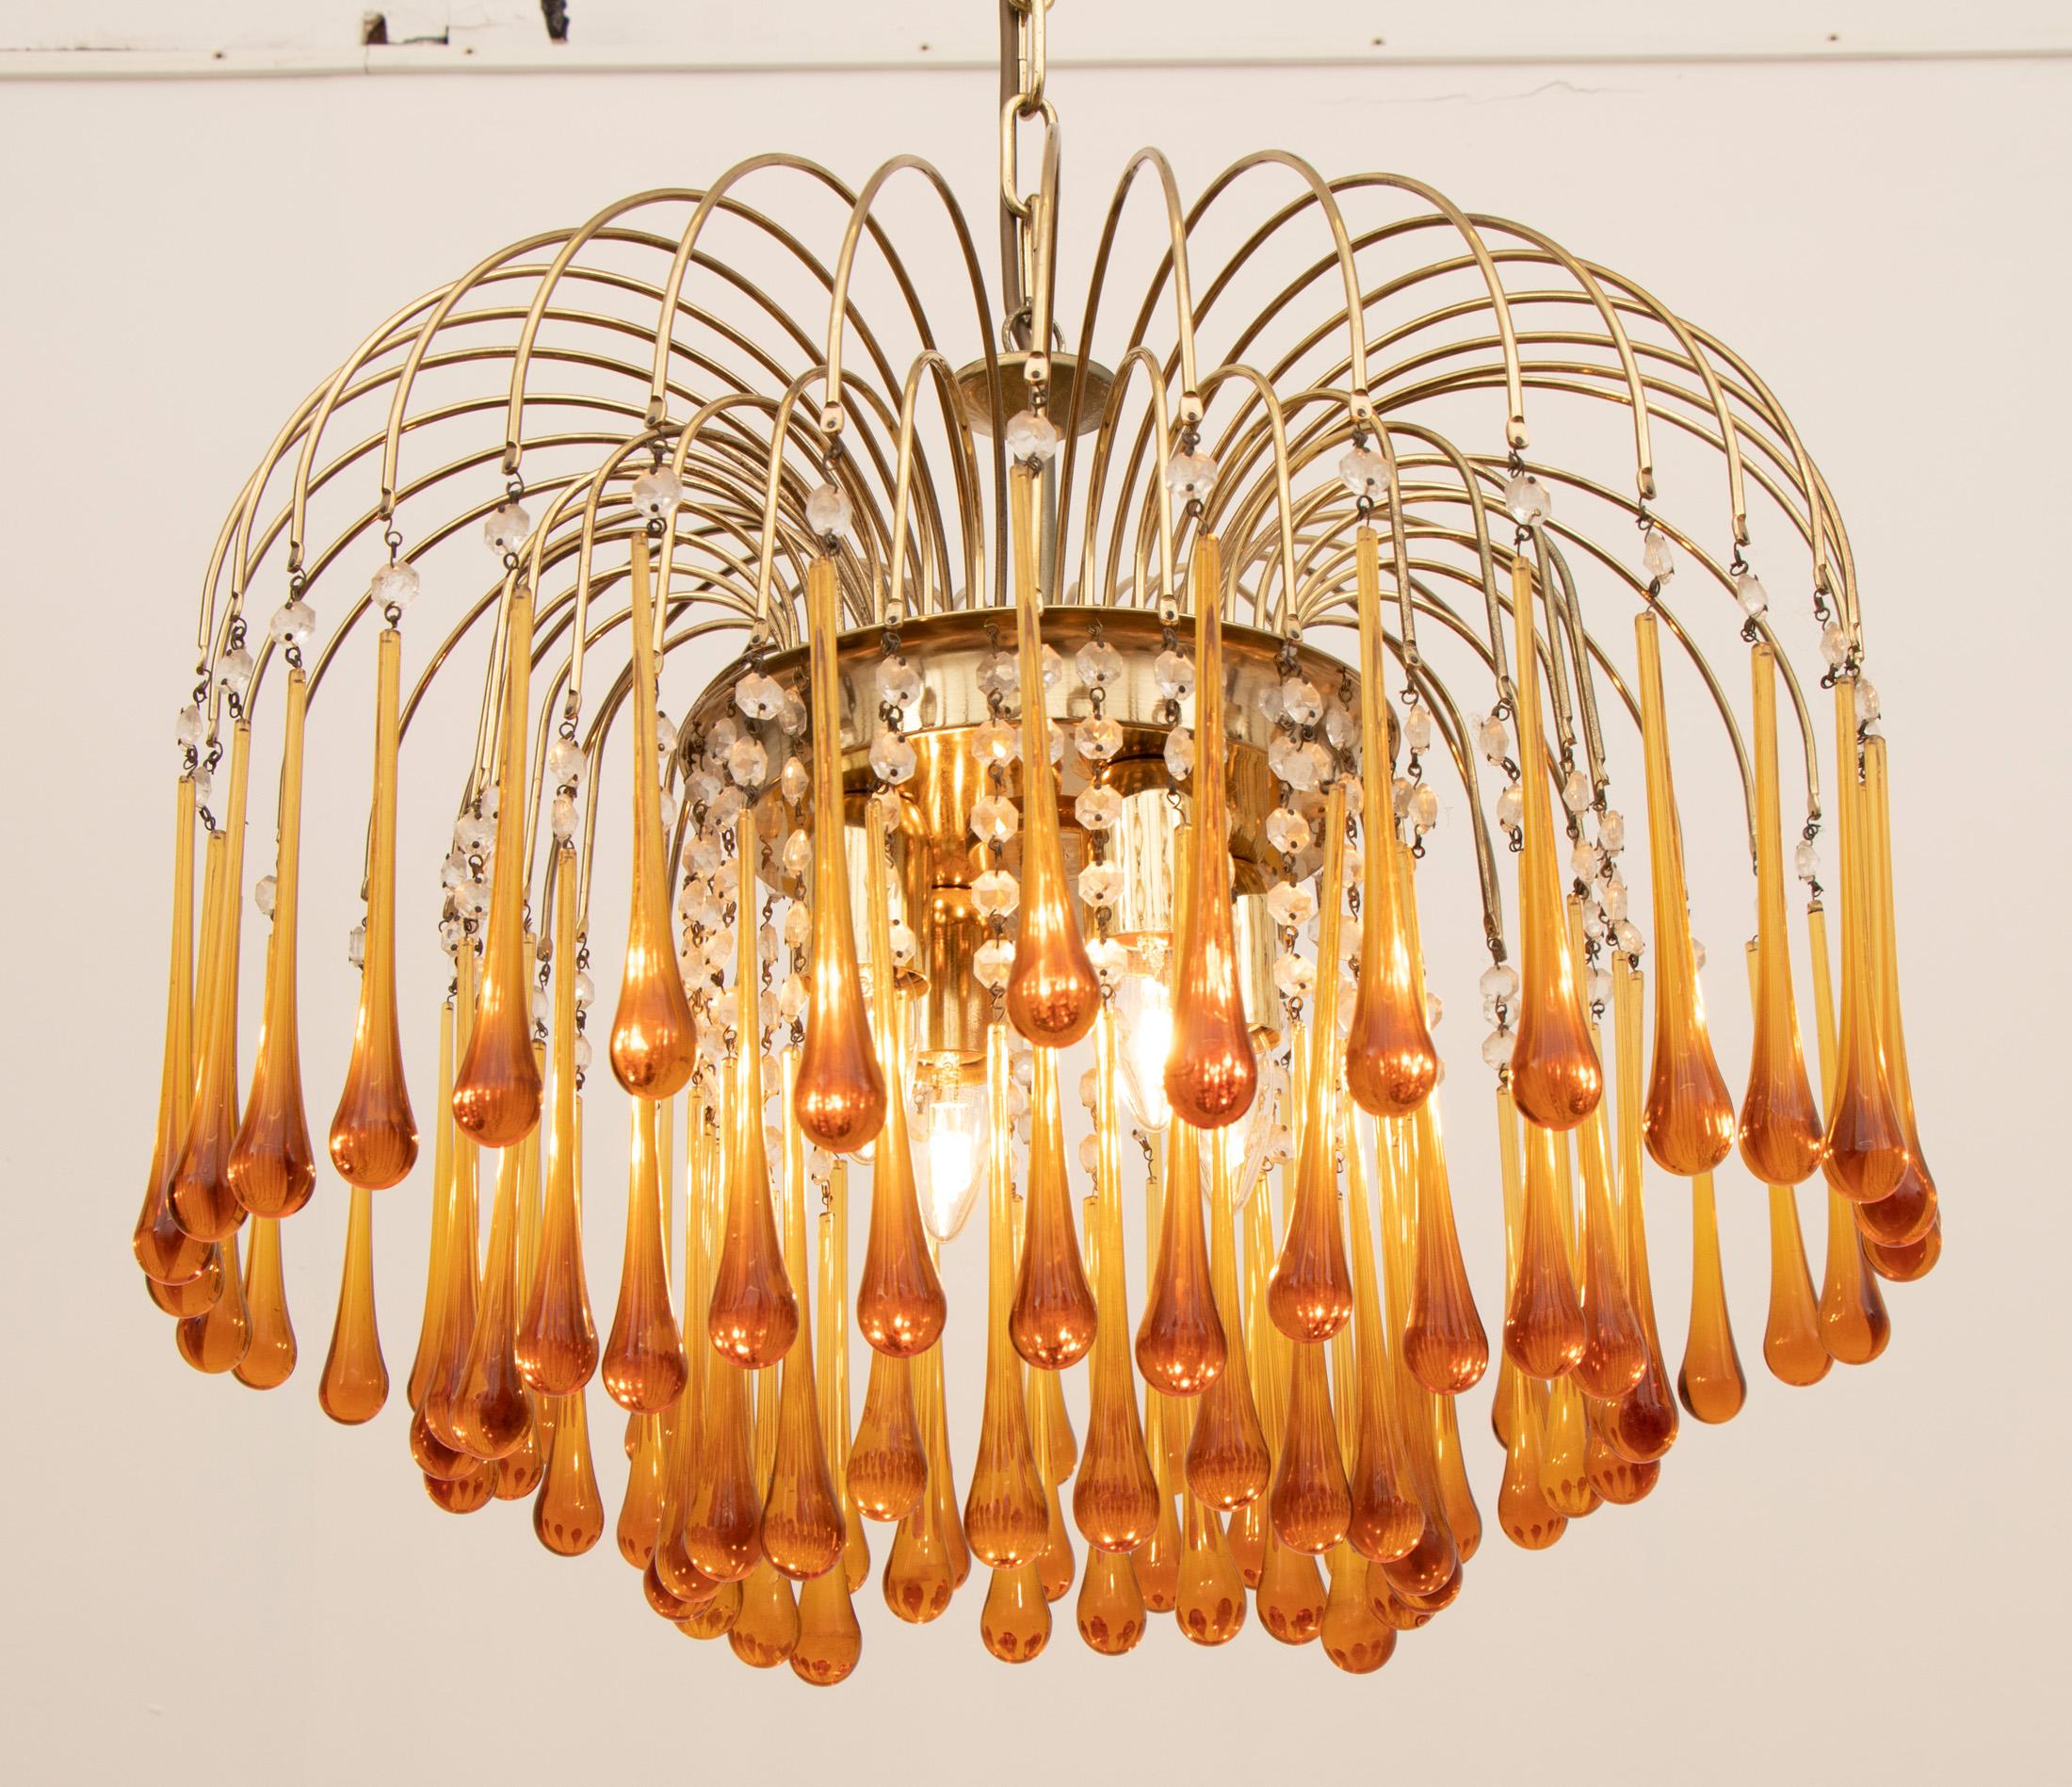 A beautiful and striking vintage 1960s Italian, Murano, amber glass, cascading, chandelier designed by Paolo Venini. There are three-tiers of amber glass teardrops suspended from brass stems with clear glass pearls diving the two. Four large E27